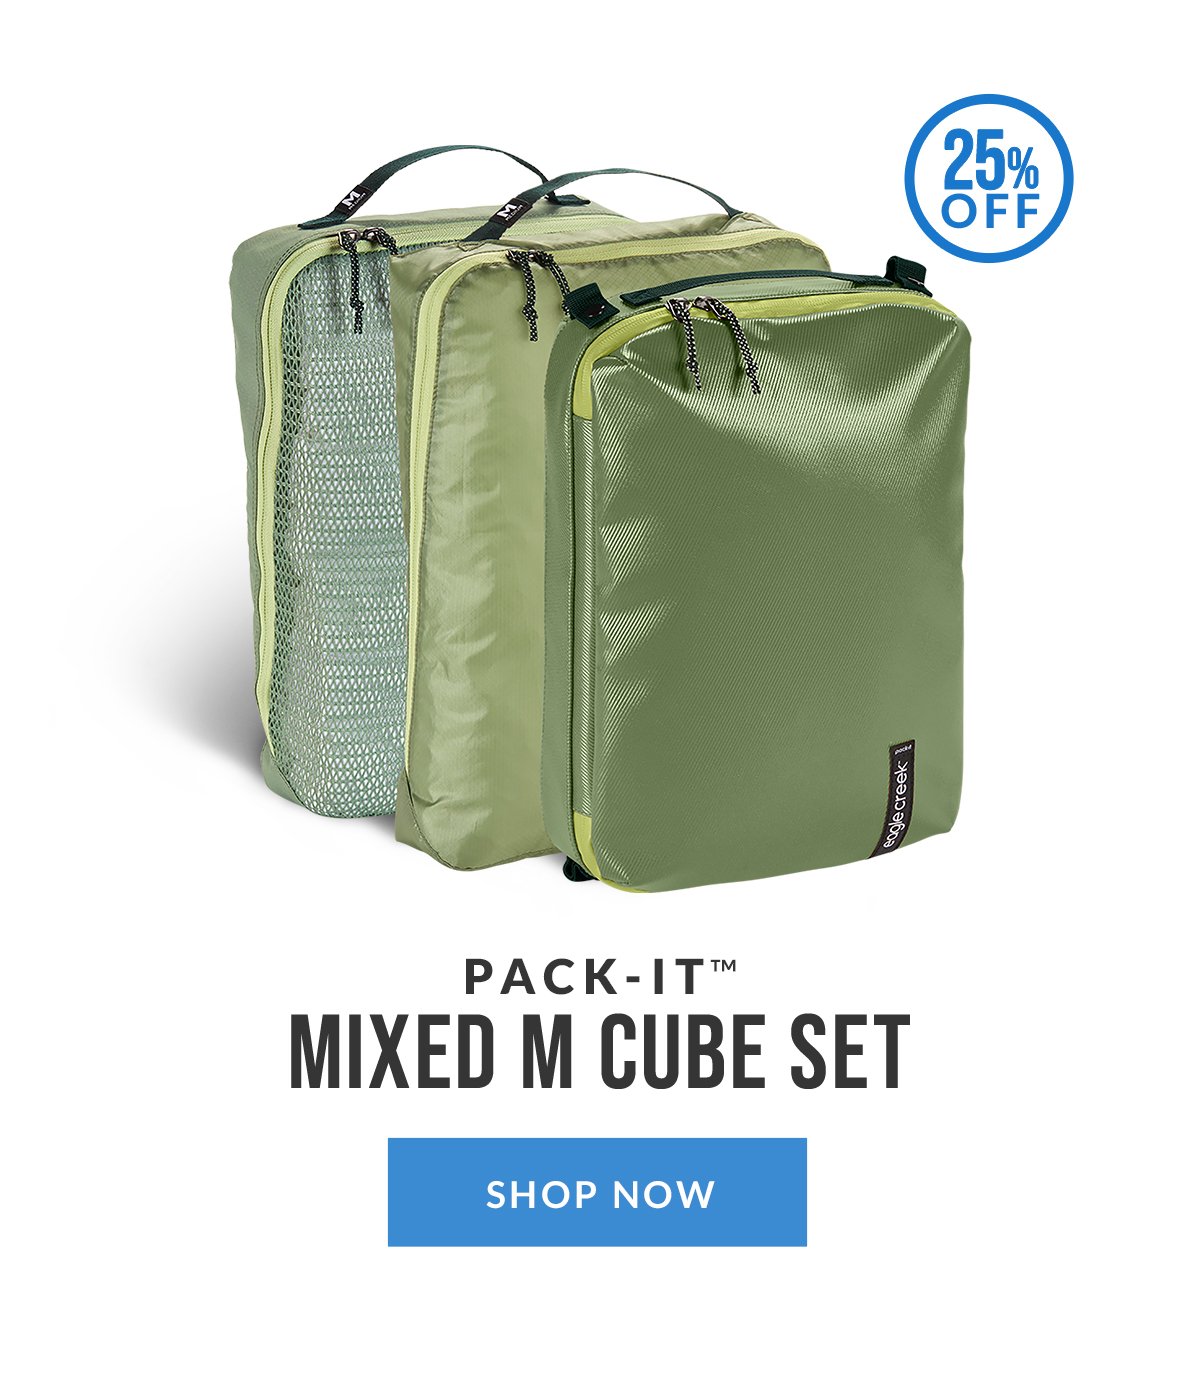 Pack-It Mixed Cube Set now 25% OFF